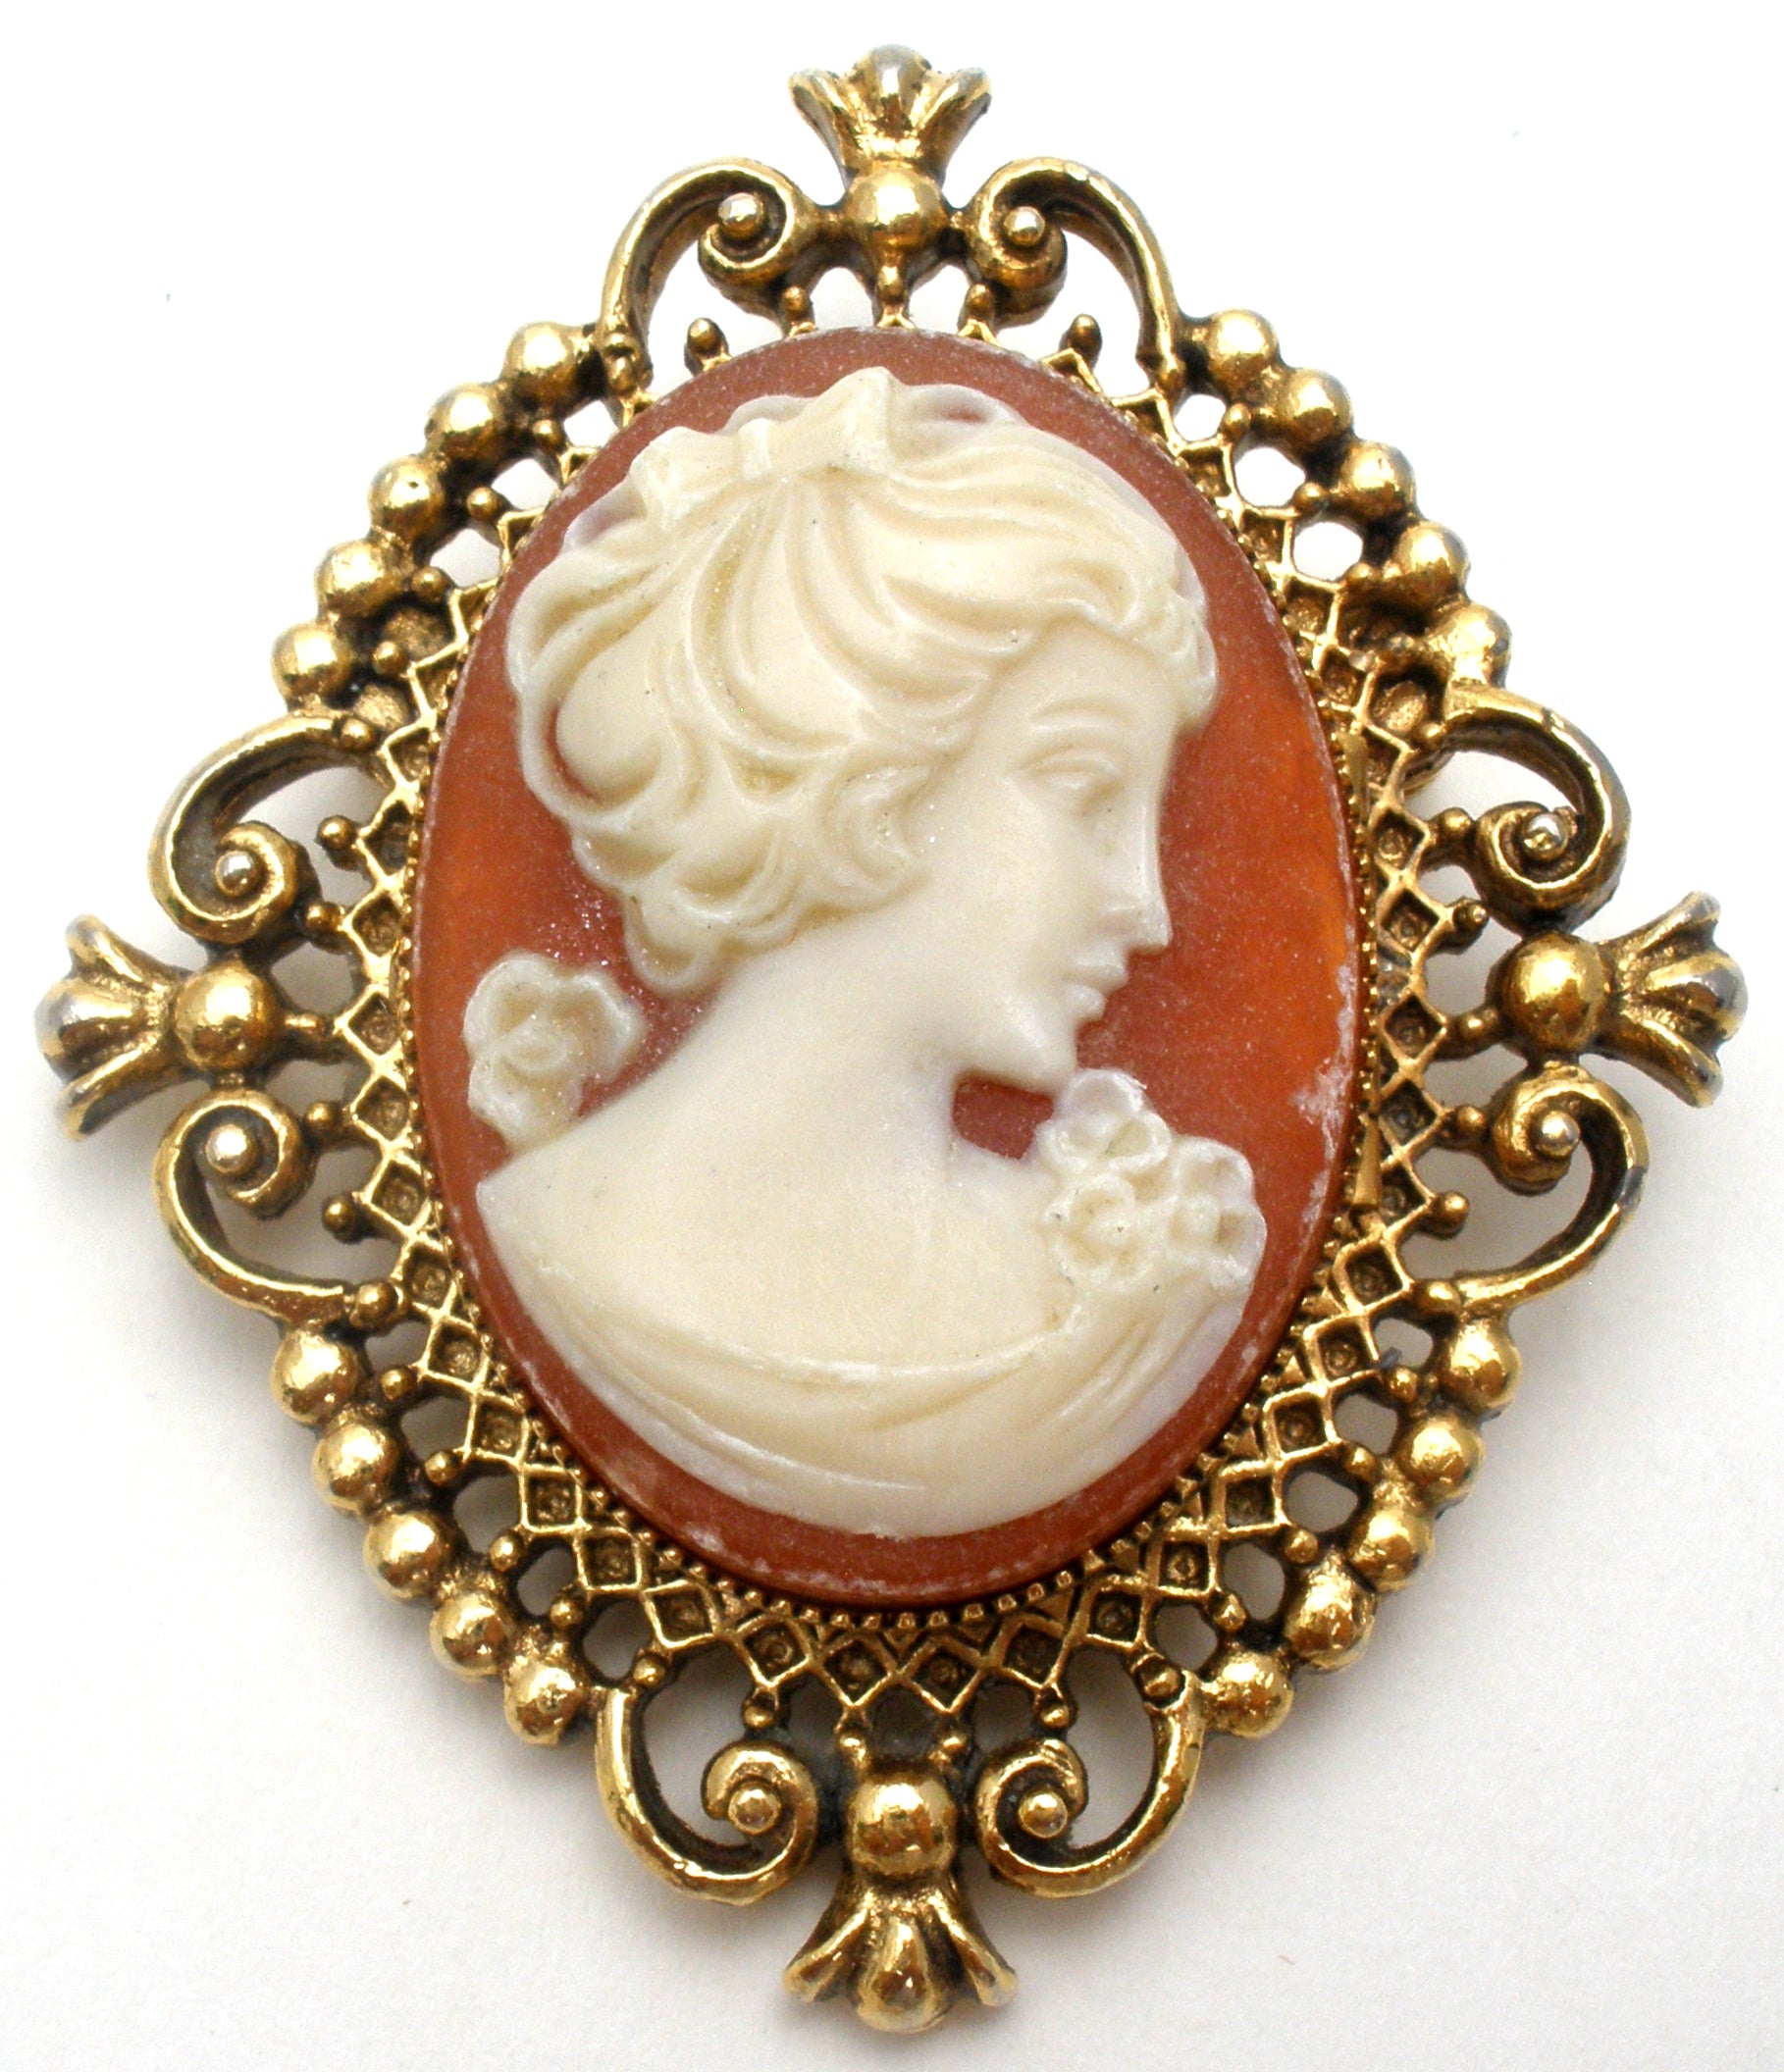 Cameo Perfume Locket Brooch Pin Vintage Avon – The Jewelry Lady's Store